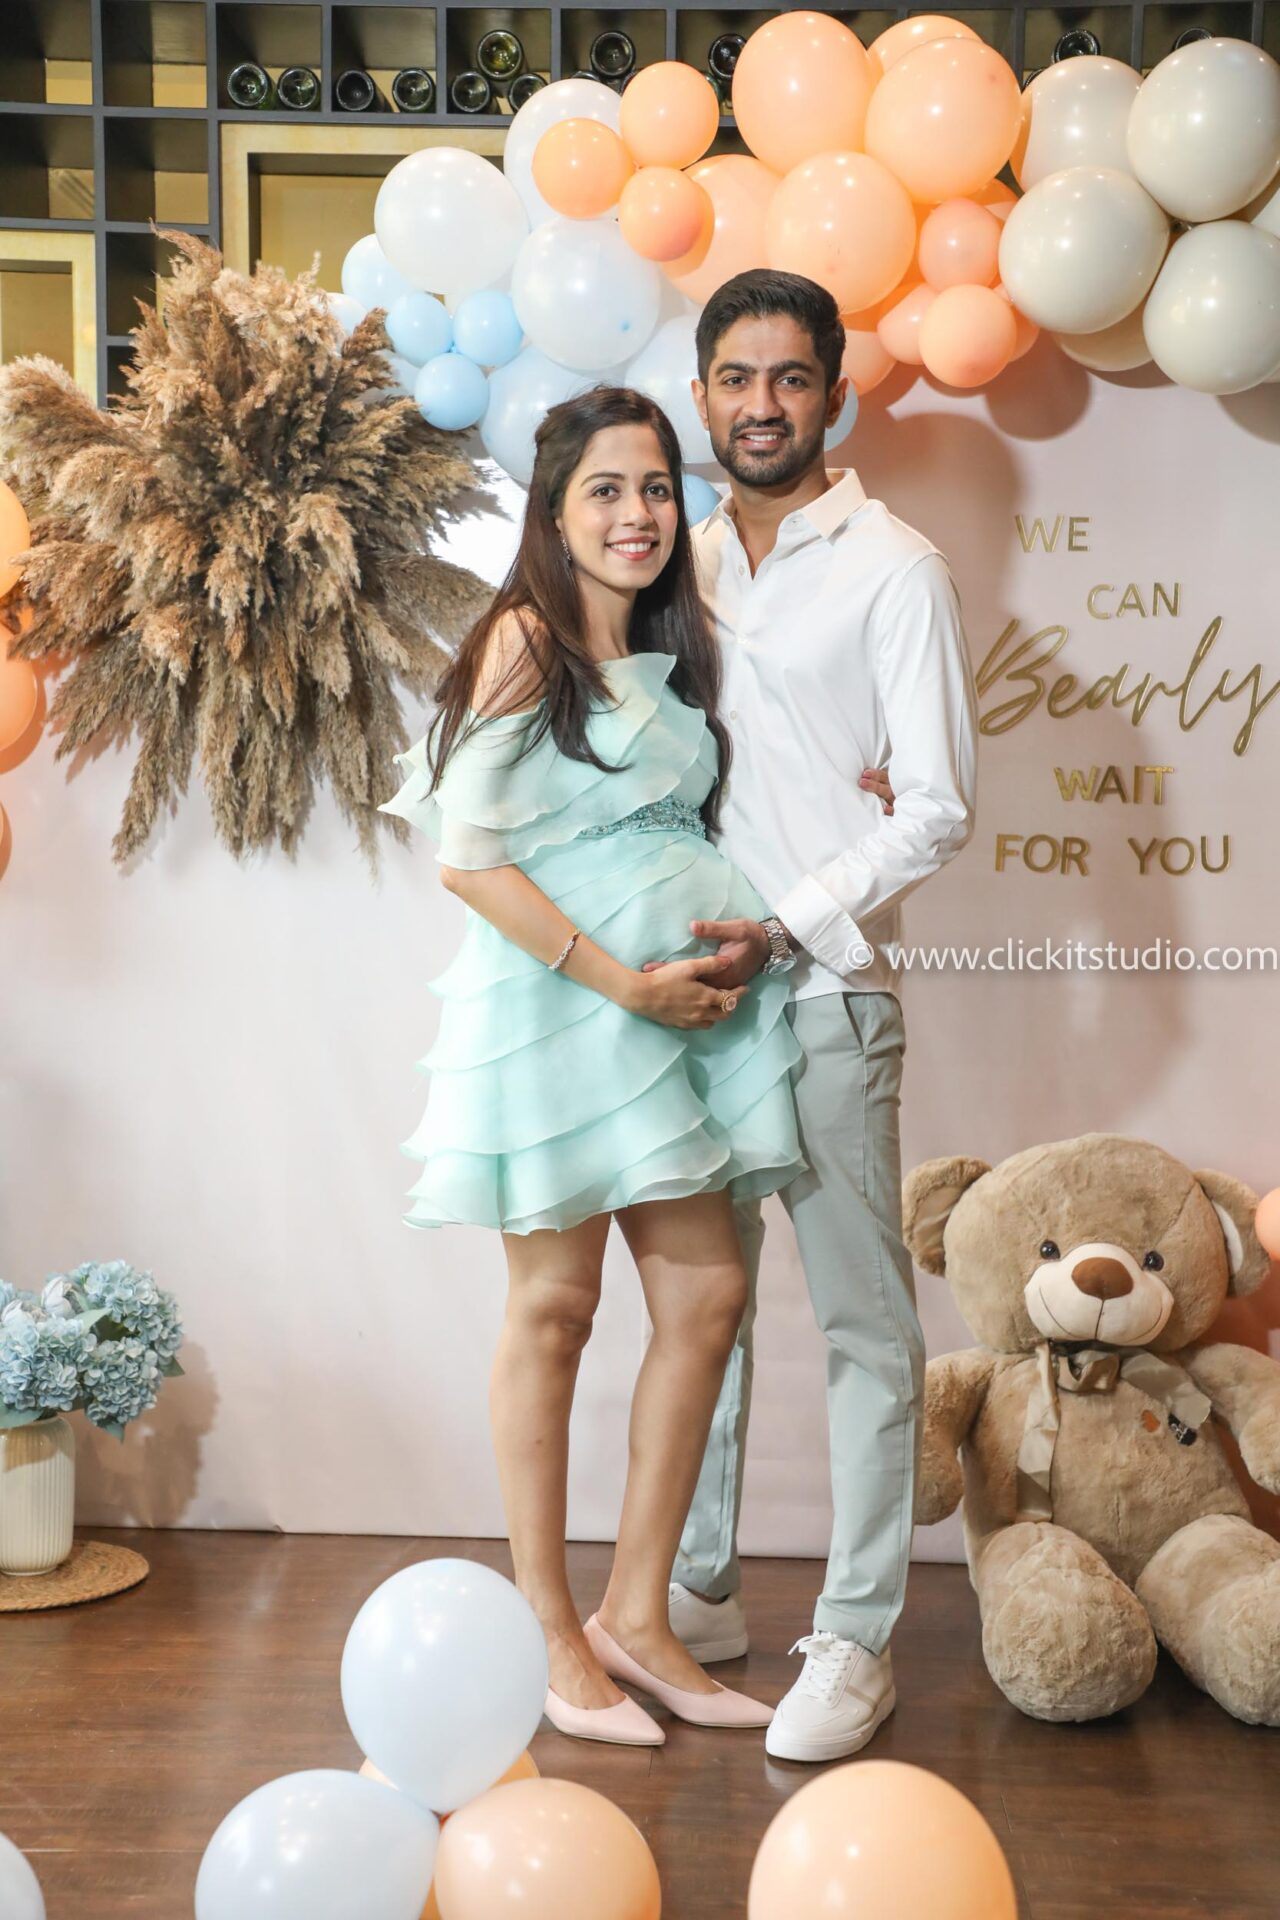 Your Trusted Mumbai Photographers for Baby Shower Bliss